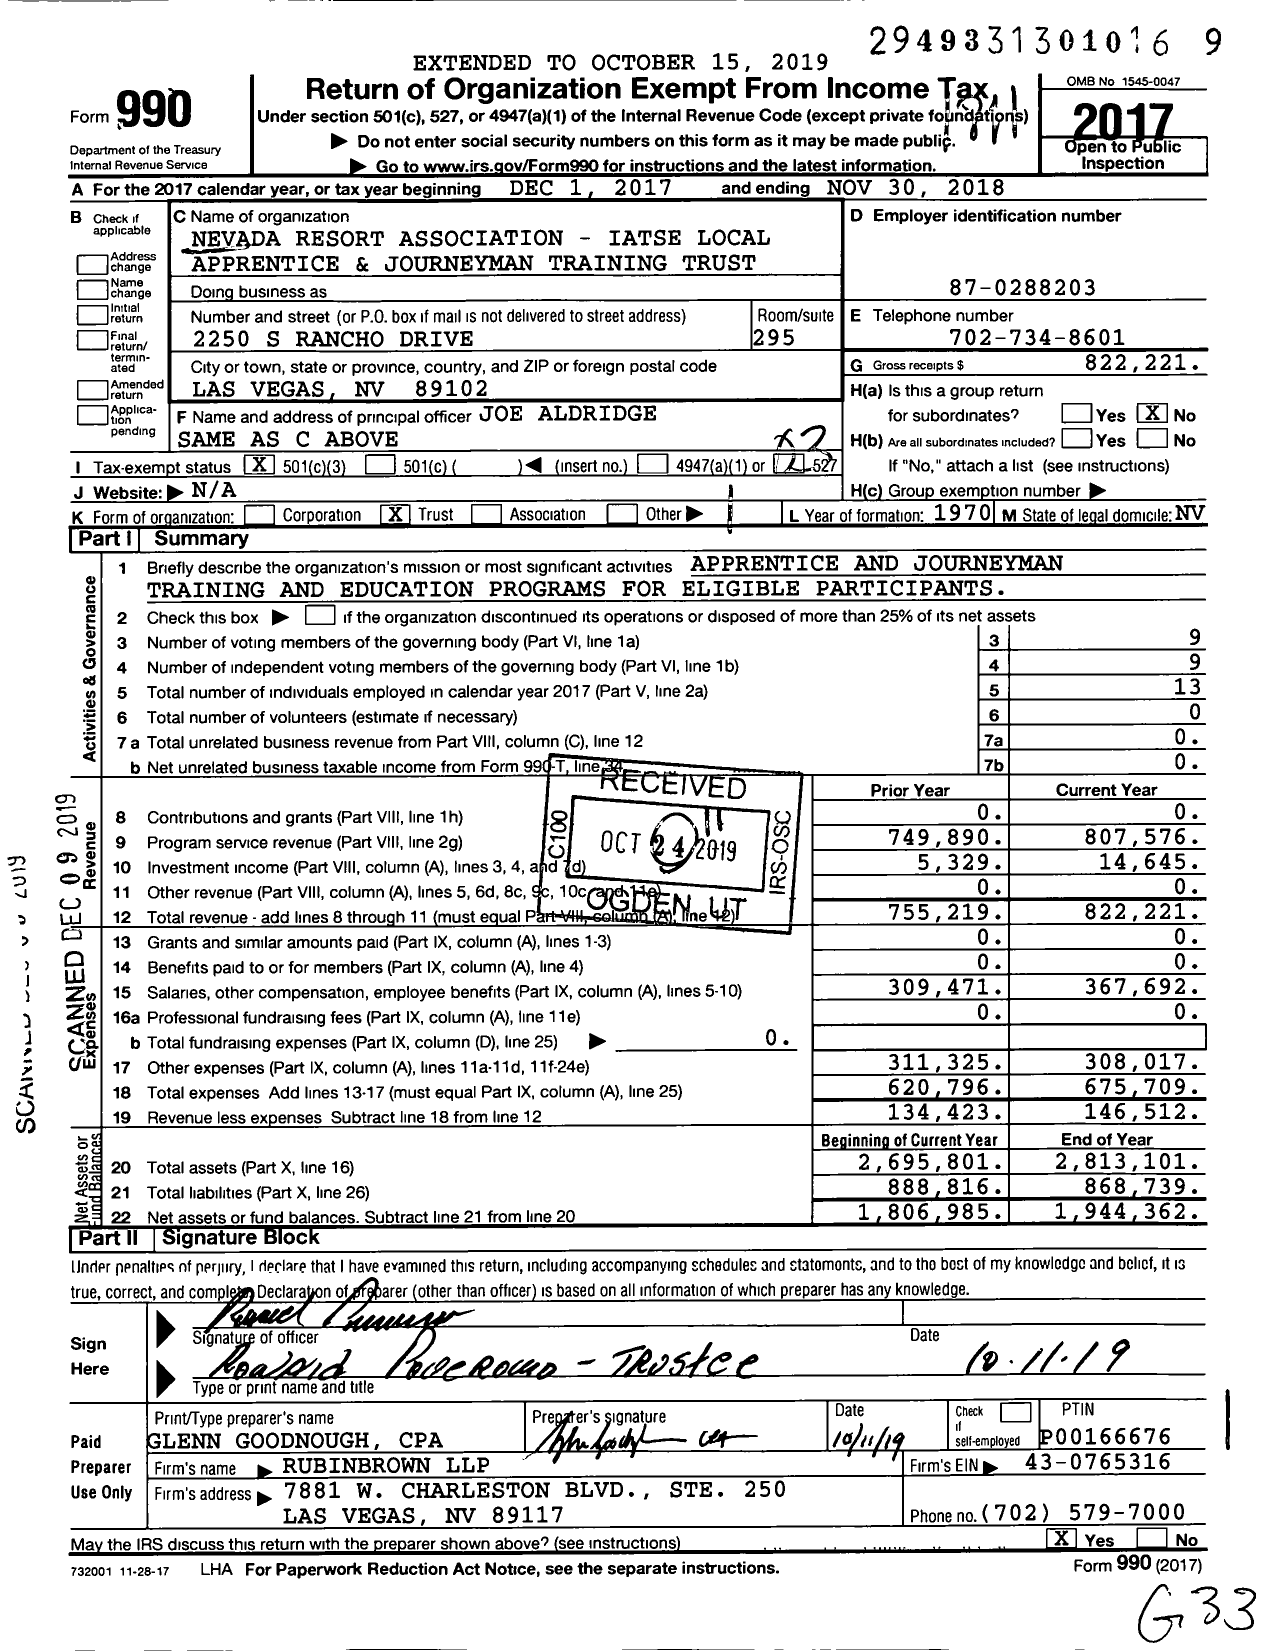 Image of first page of 2017 Form 990 for Nevada Resort Association-Iatse Local Apprentice and Journeyman Training Trust